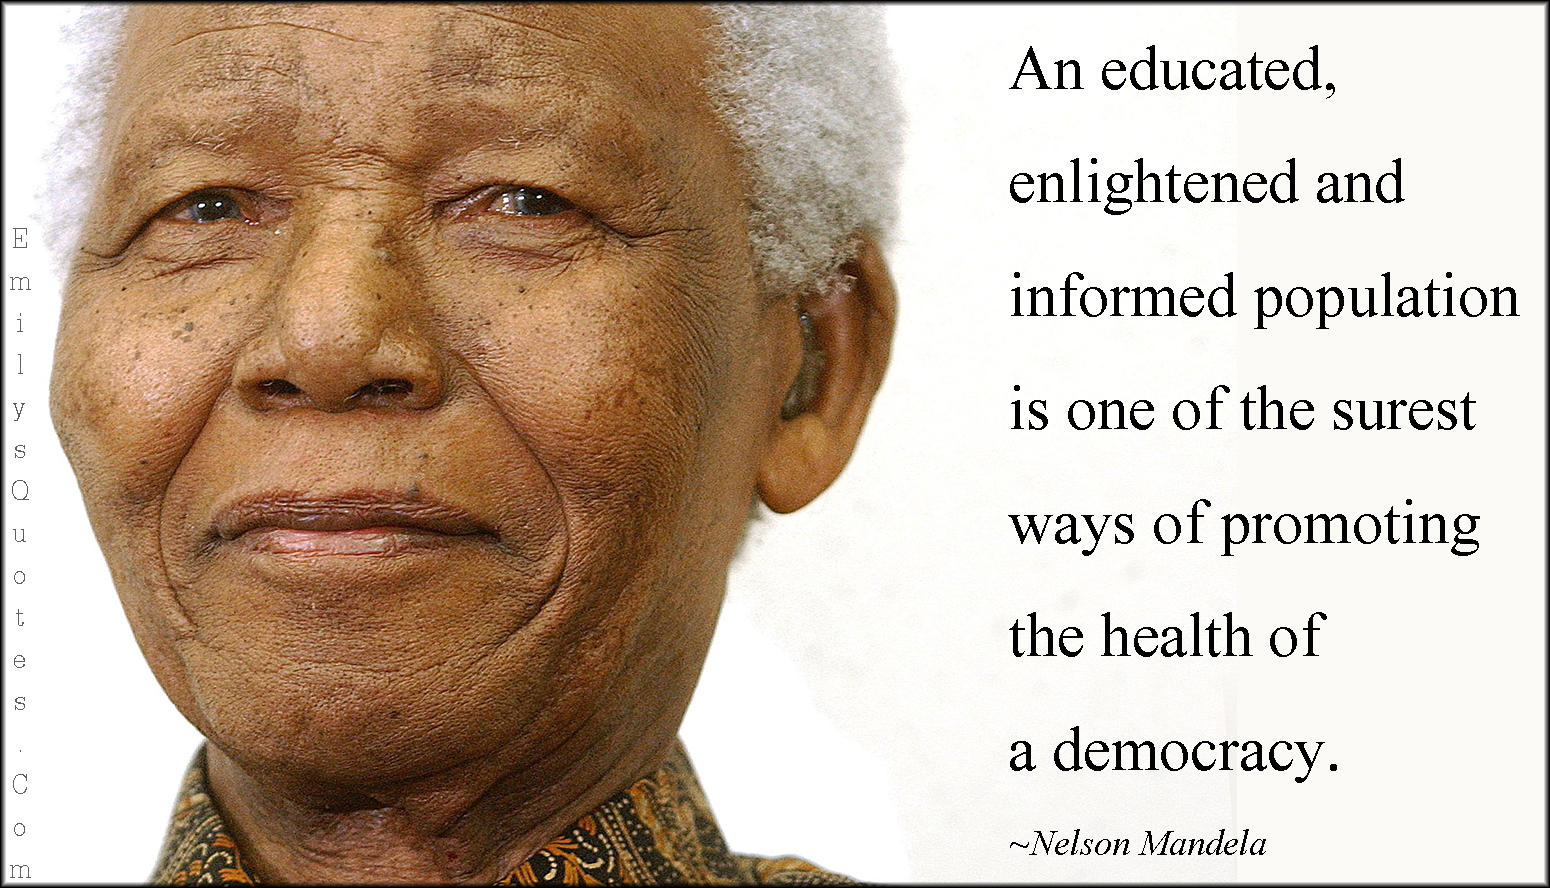 An educated, enlightened and informed population is one of the surest ways of promoting the health of a democracy